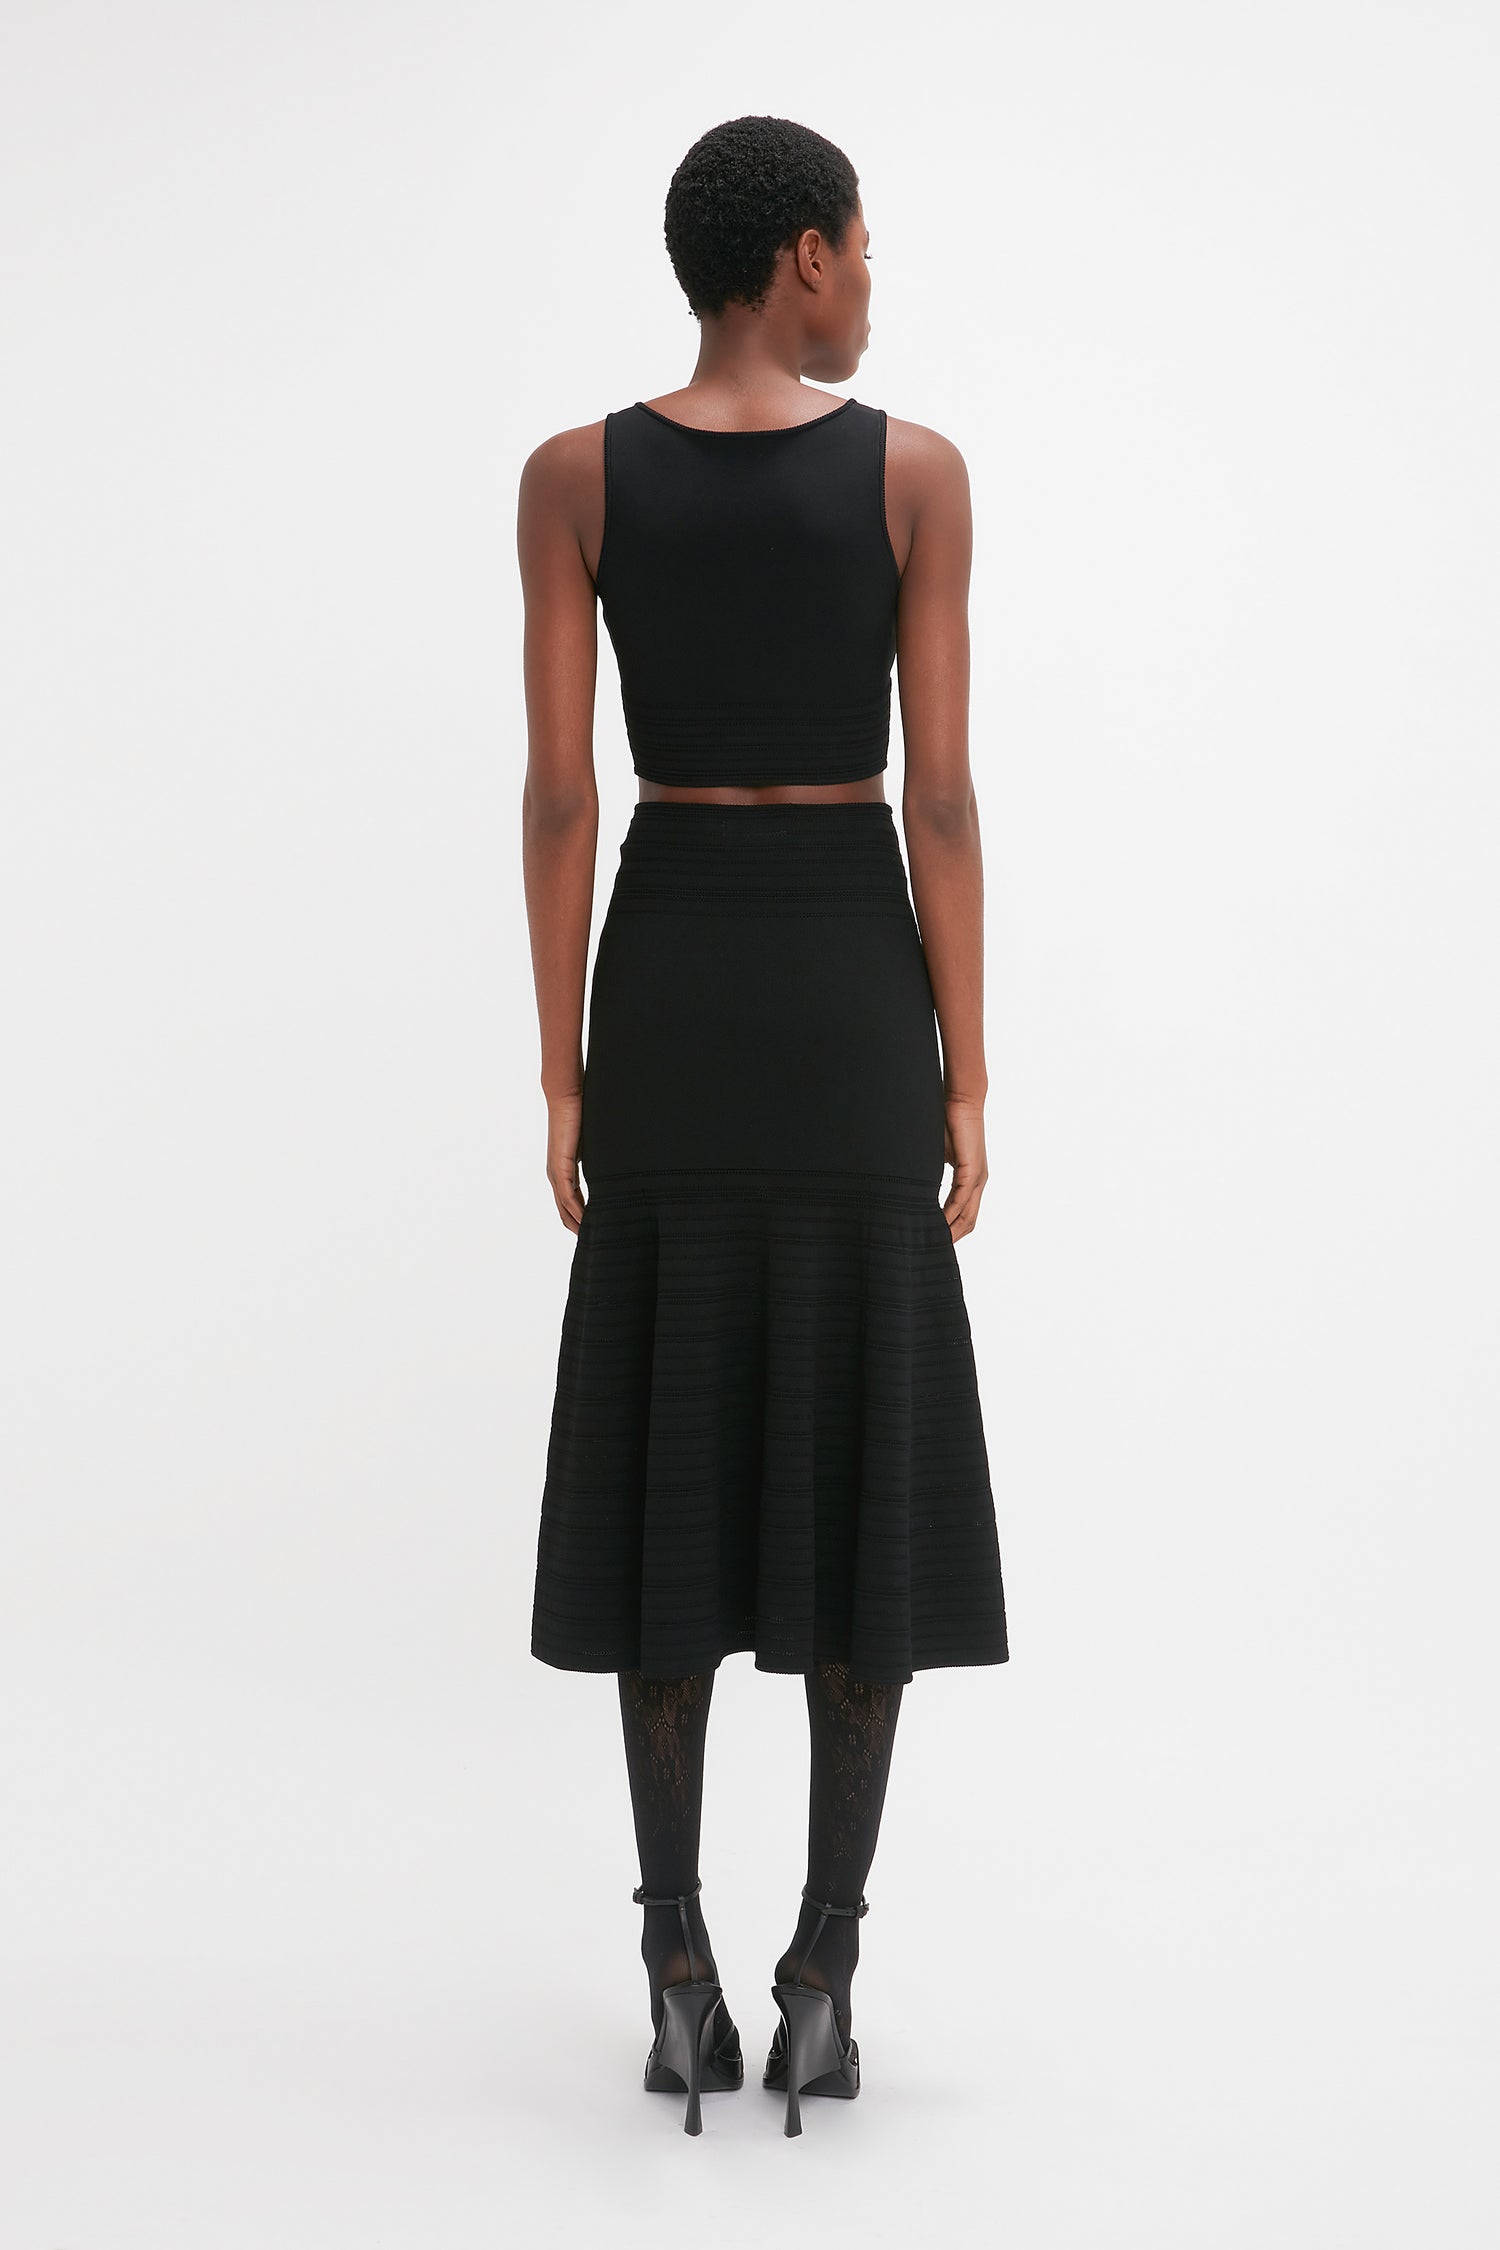 A woman from behind, in a black Victoria Beckham Frame Detail Sleeveless Top and pleated skirt with a cropped hemline, paired with high heels and patterned tights, standing against a white background.